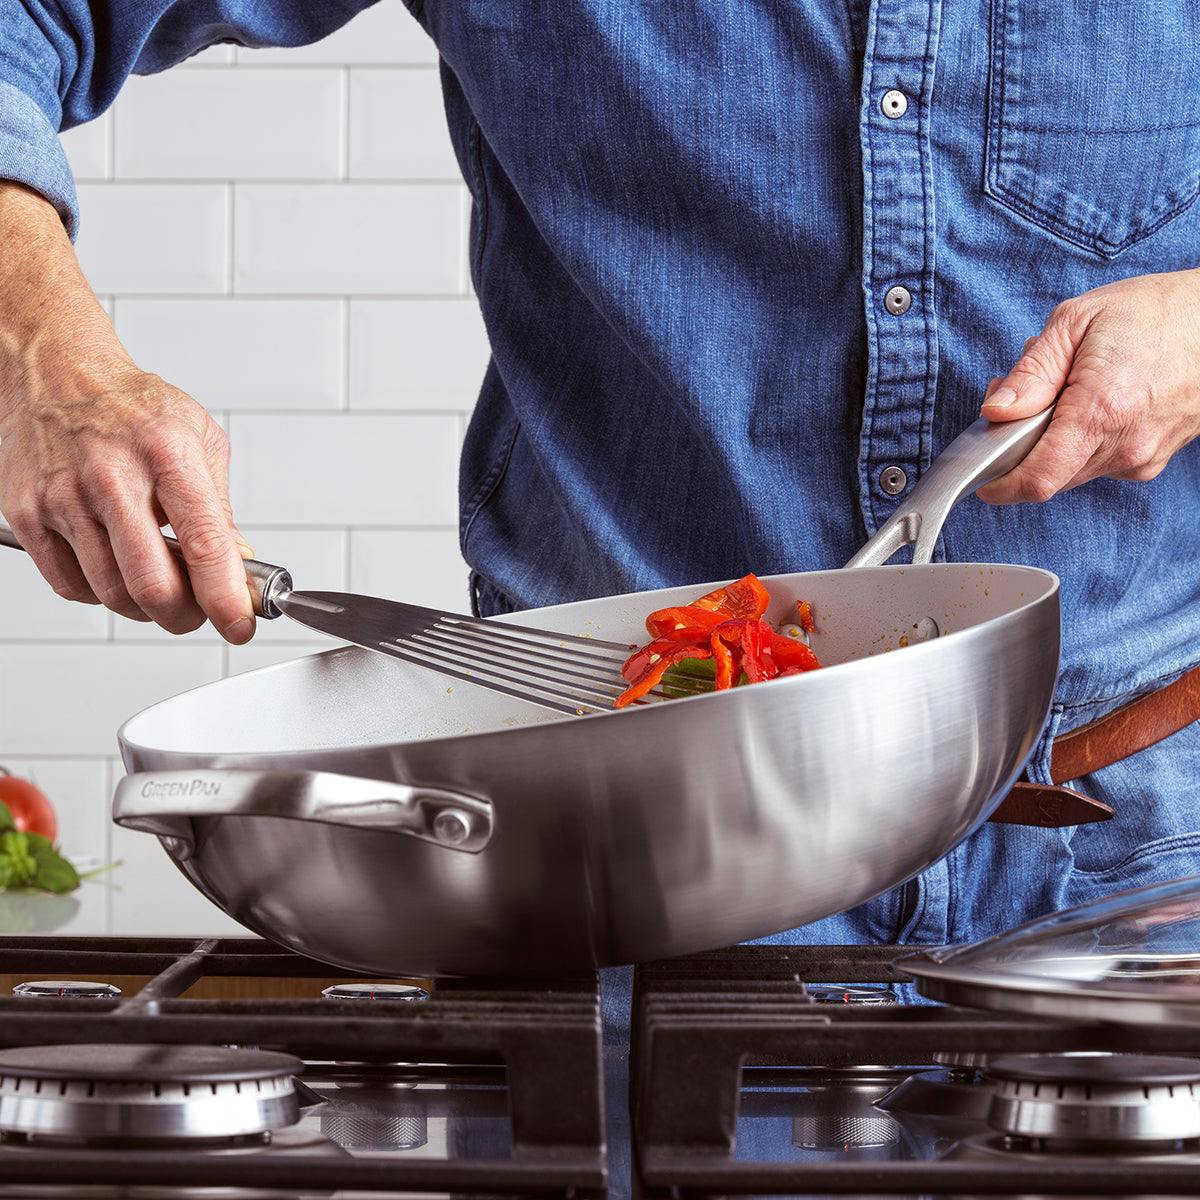 Circulon C-Series Nonstick Clad Induction Covered Wok 36cm In Stainless  Steel